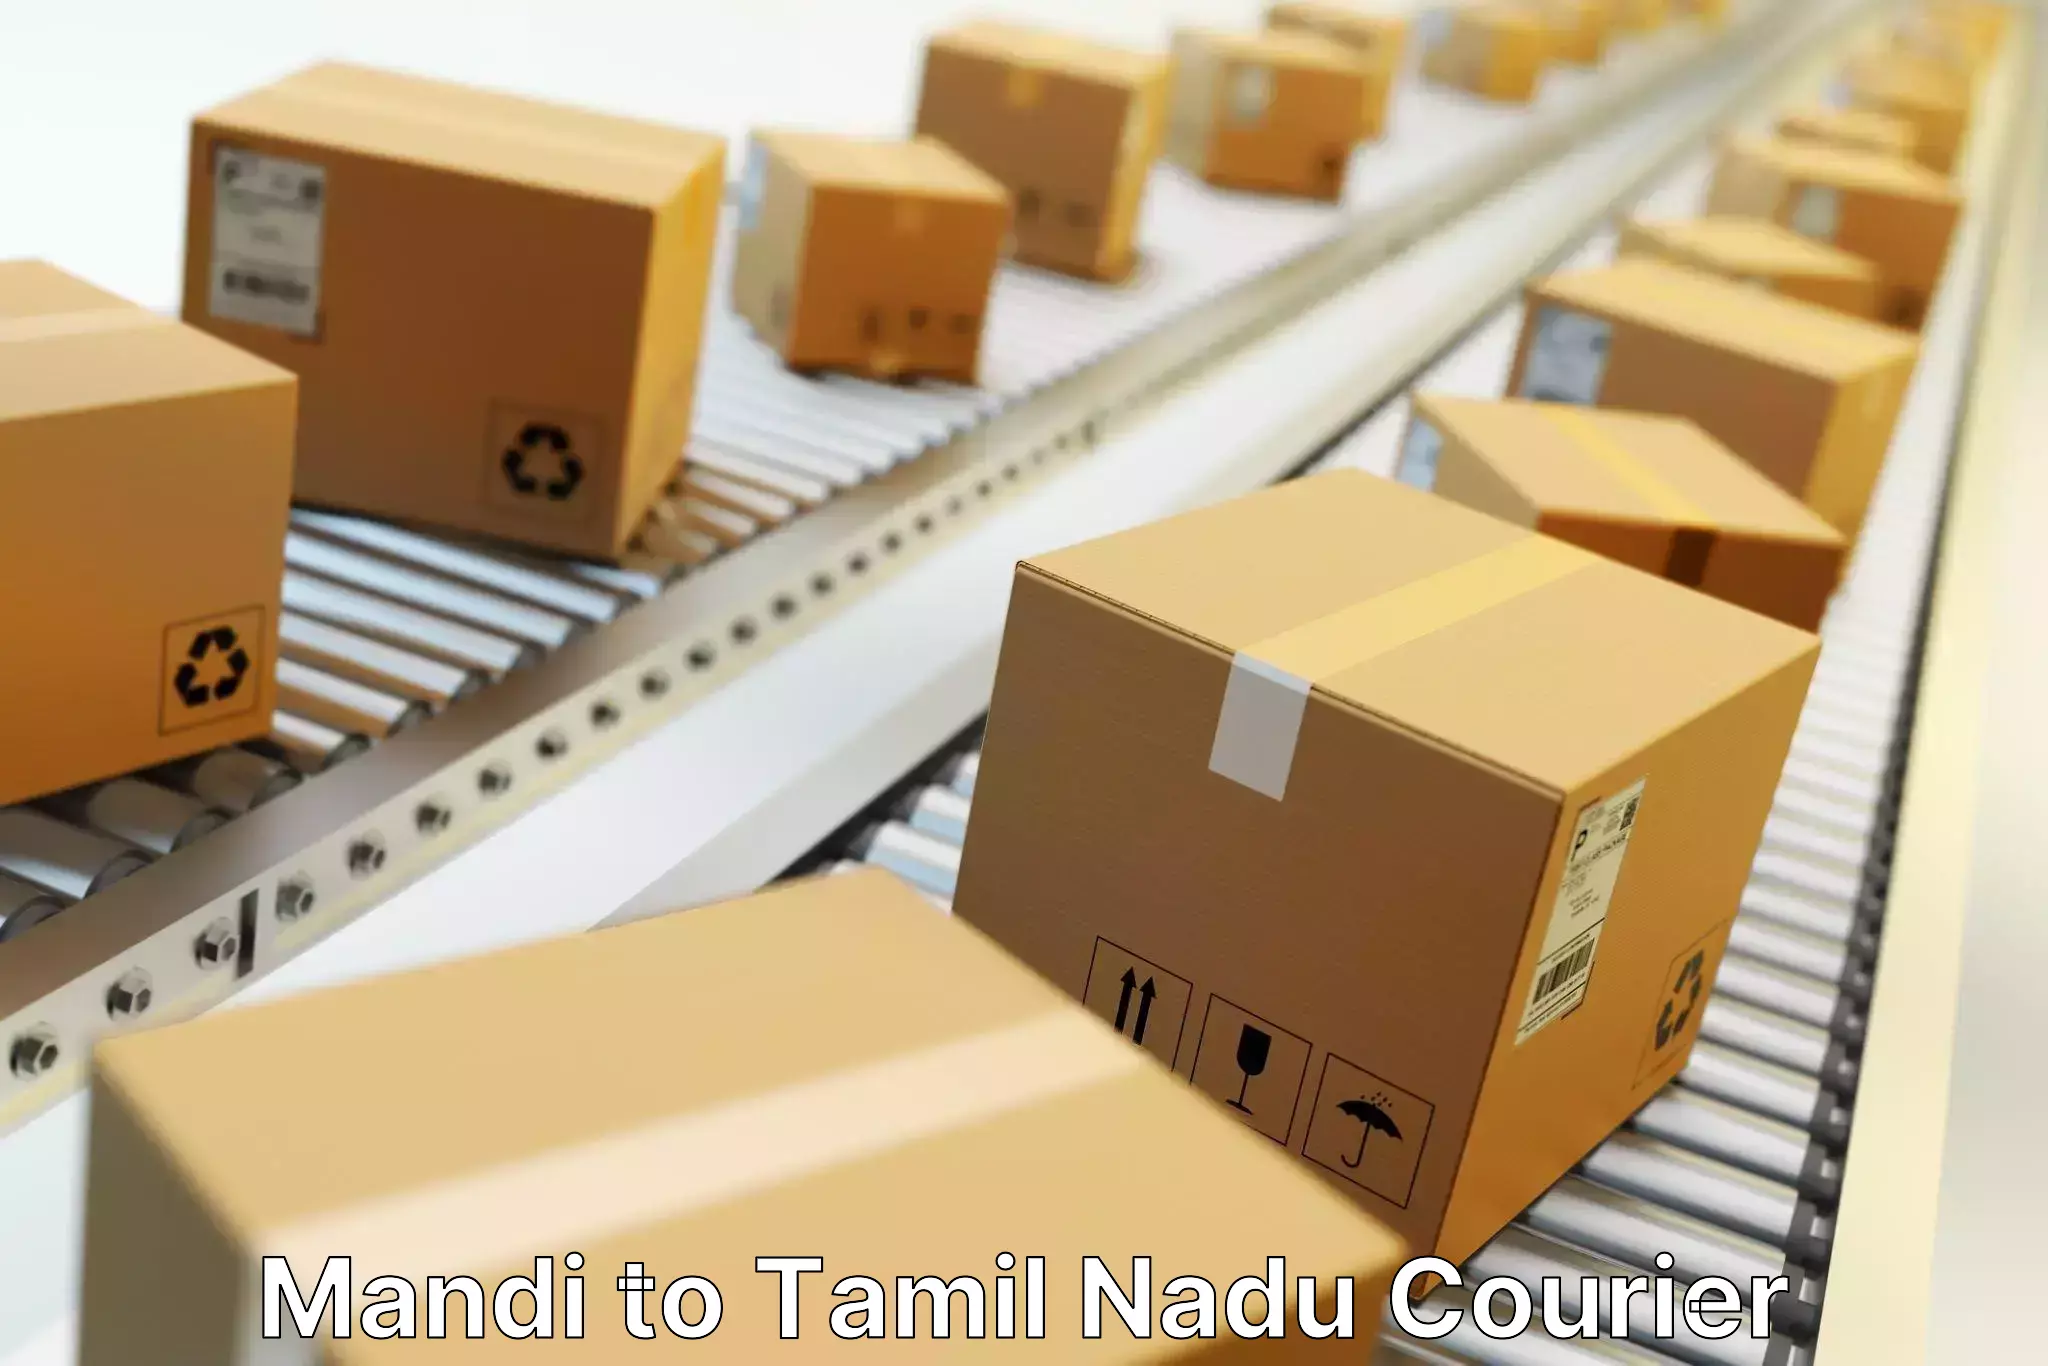 Supply chain delivery Mandi to Ennore Port Chennai